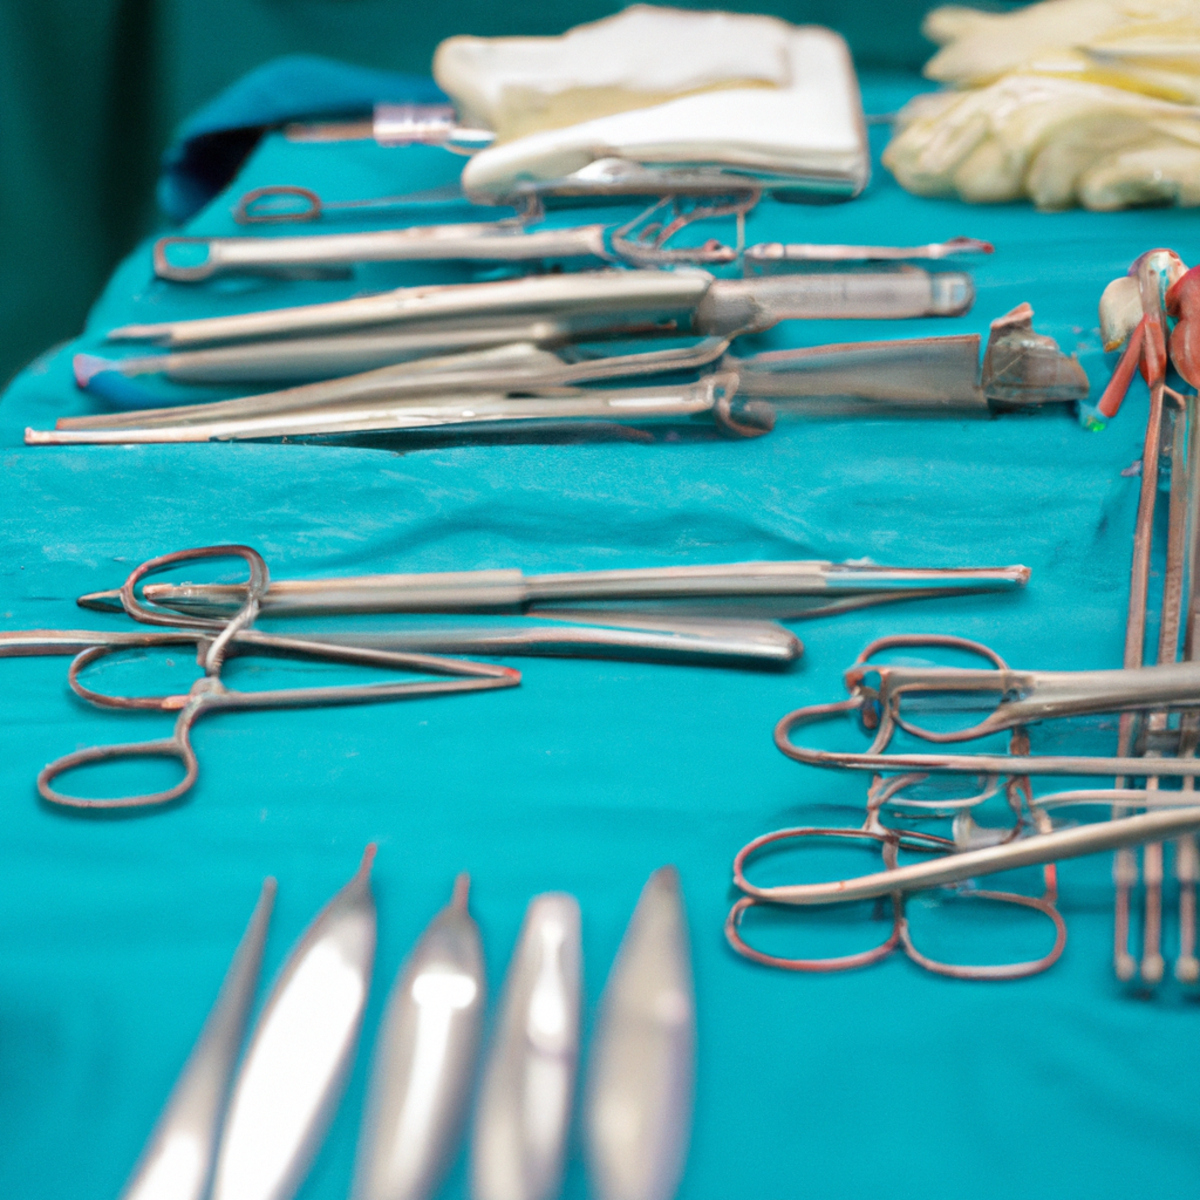 Neatly arranged surgical instruments on a table in a well-lit operating room, showcasing precision and professionalism - Gallbladder Duplication